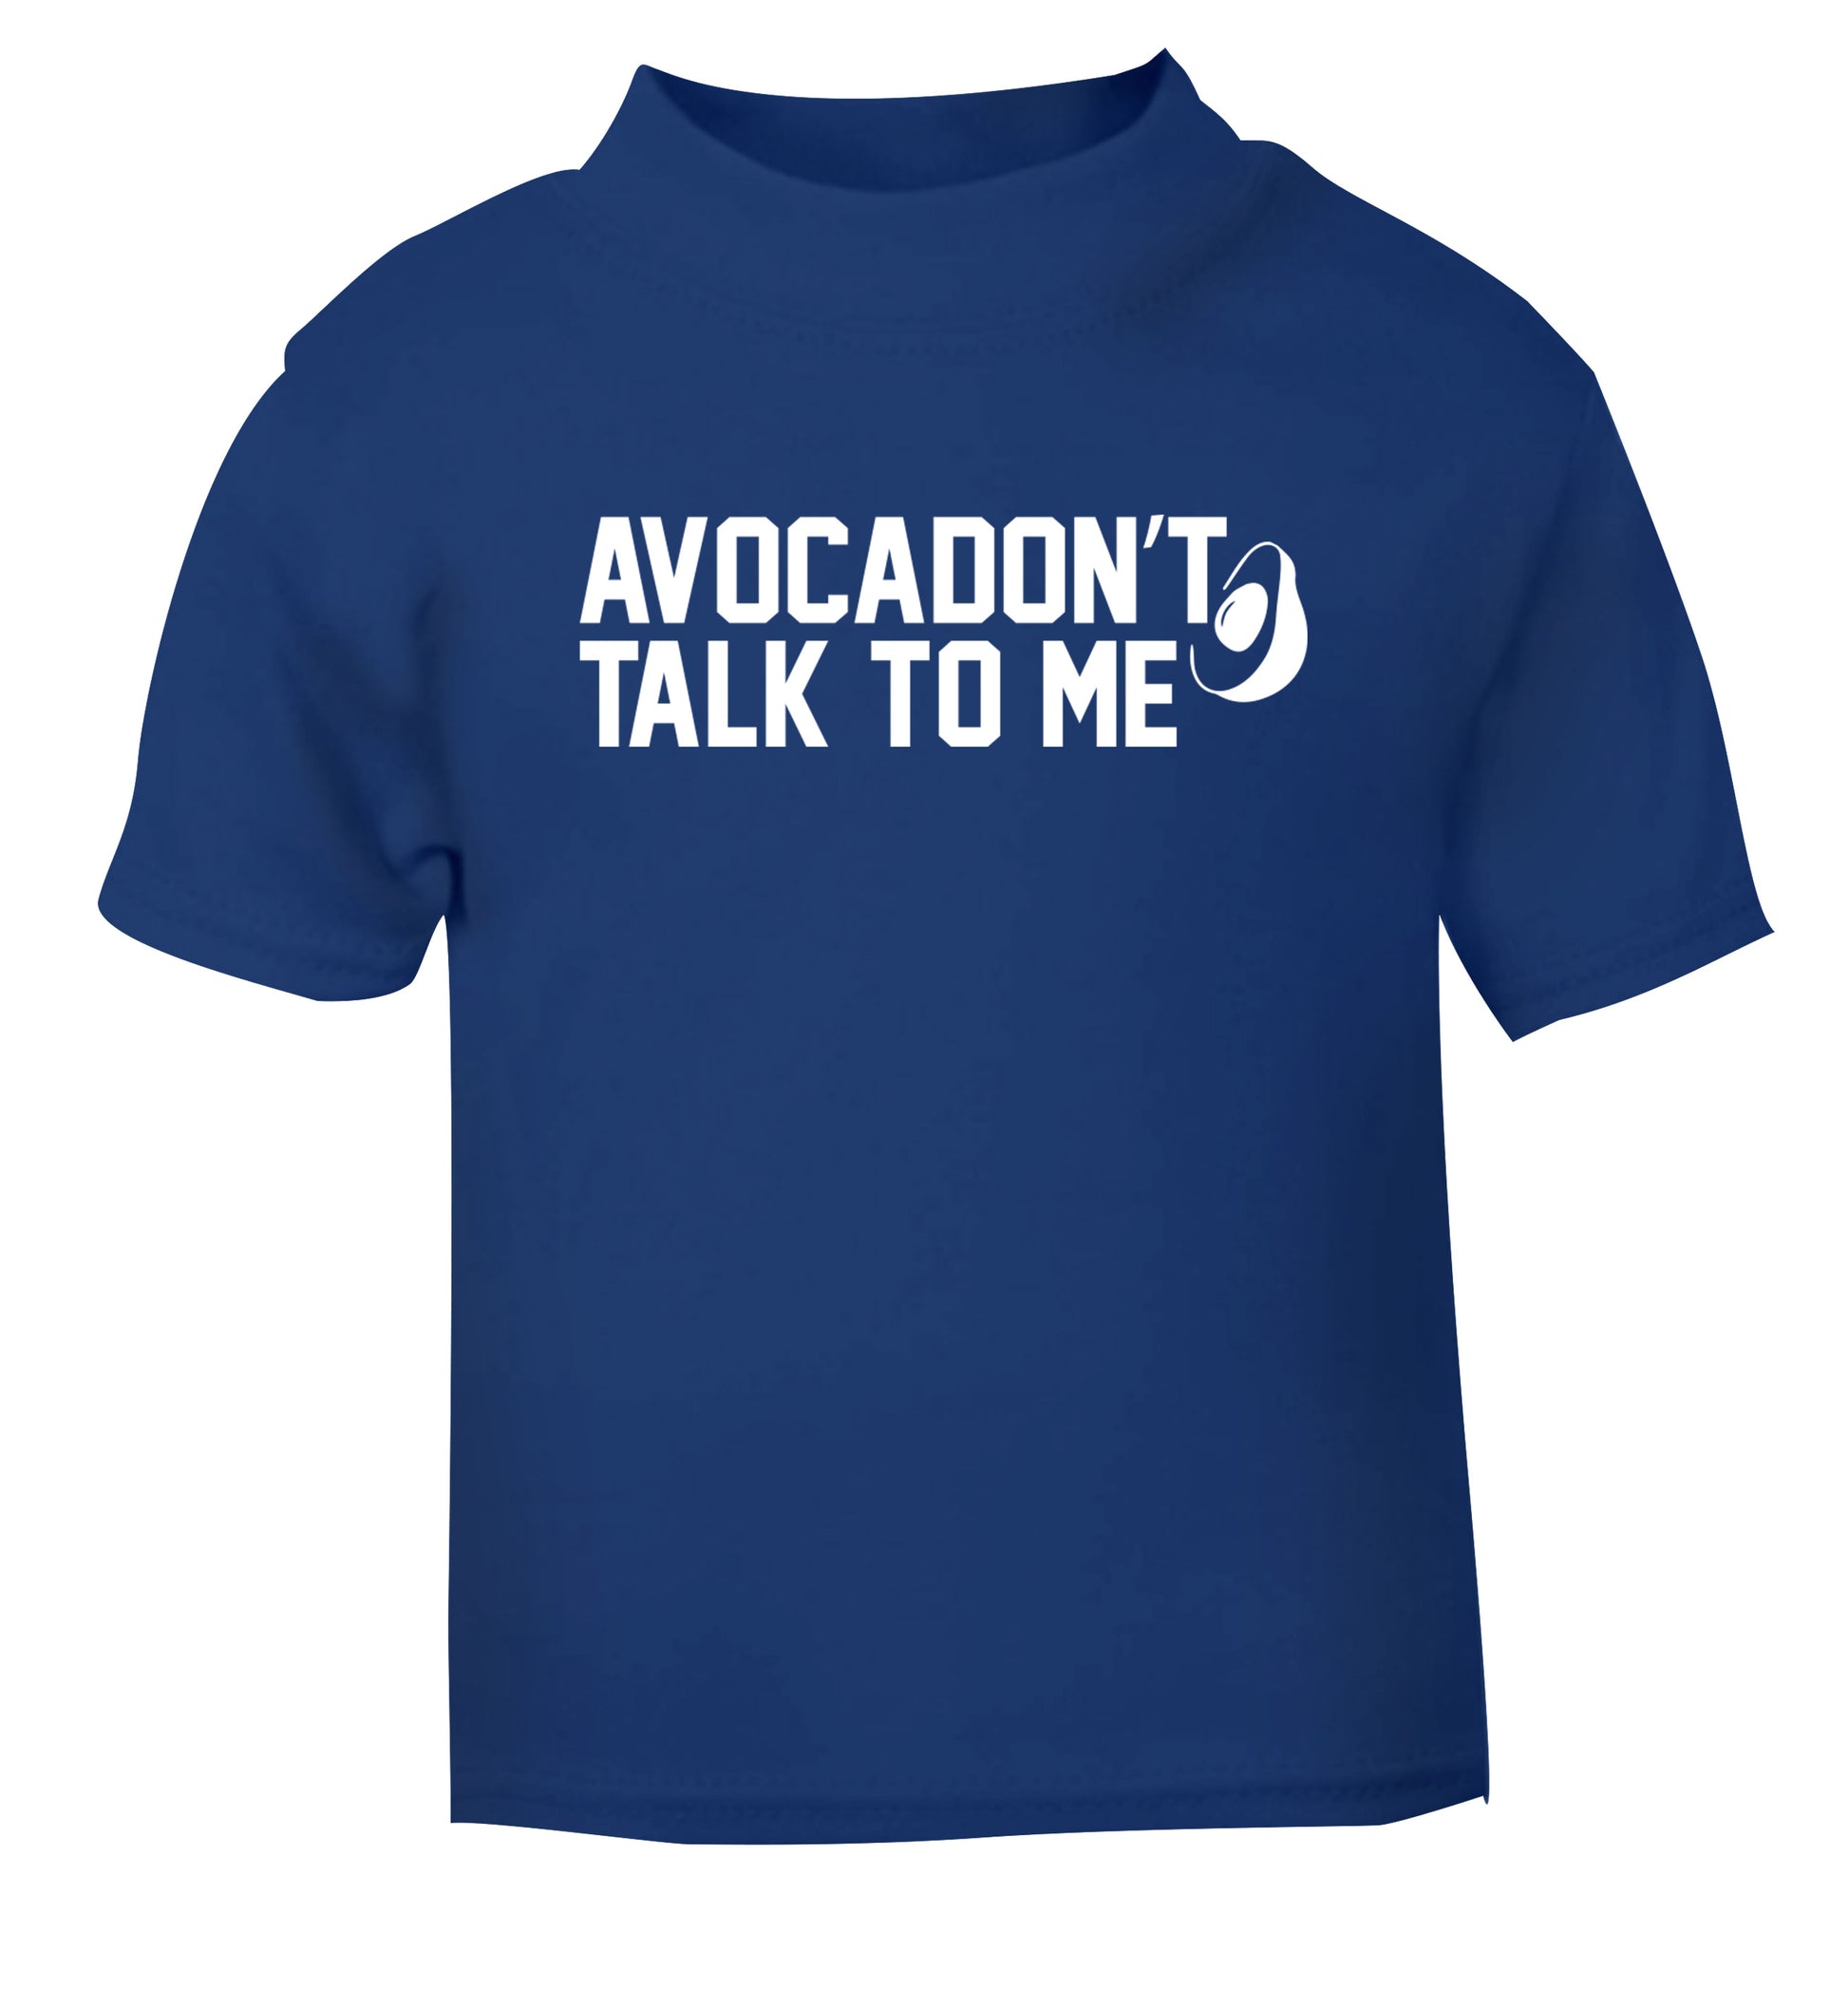 Avocadon't talk to me blue Baby Toddler Tshirt 2 Years